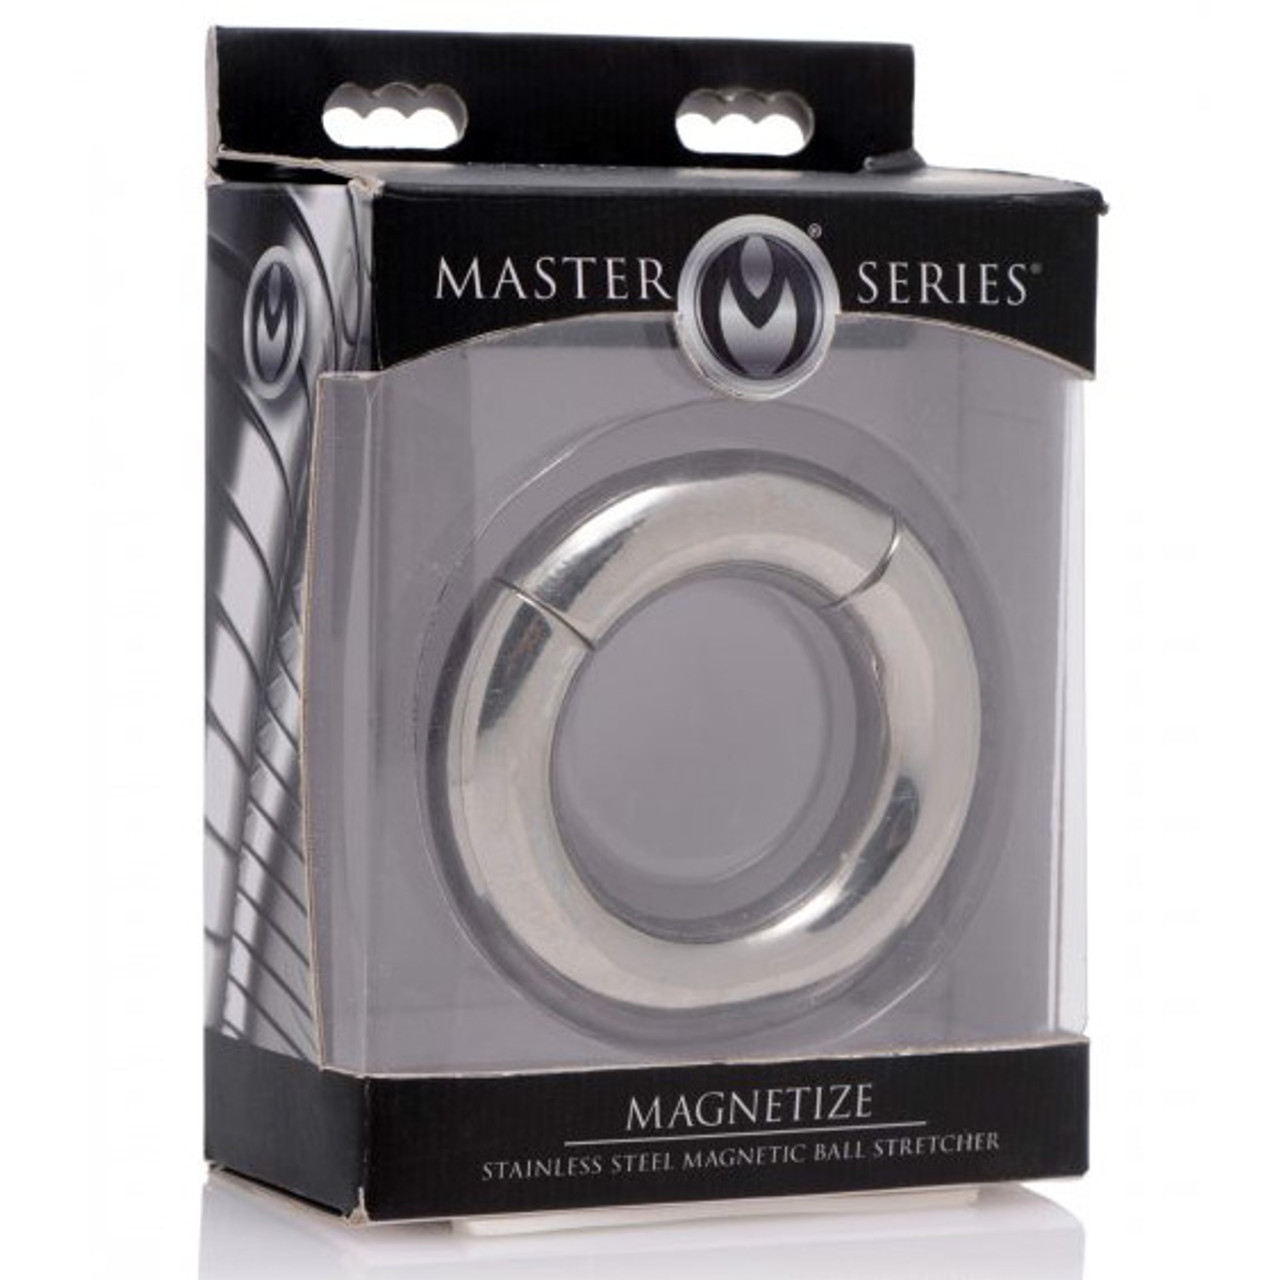 XR Brands Master Series Magna-Chute Stainless Steel Parachute-Style  Magnetic Ball Stretcher